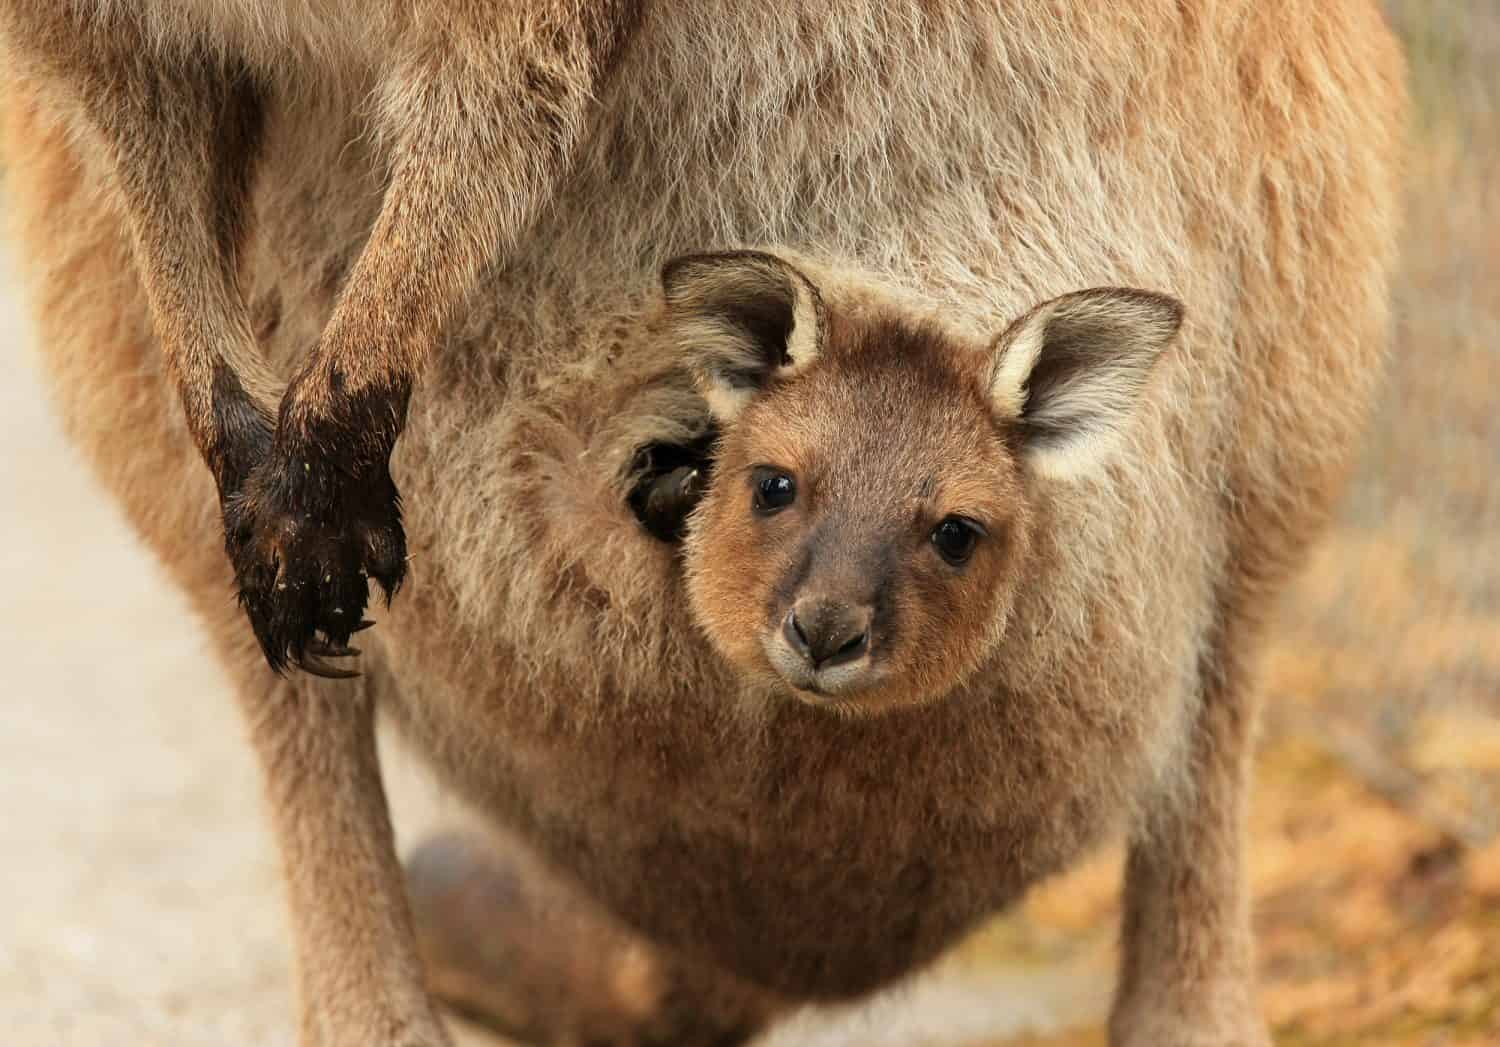 Baby kangaroo (joey) in its mother's pouch.